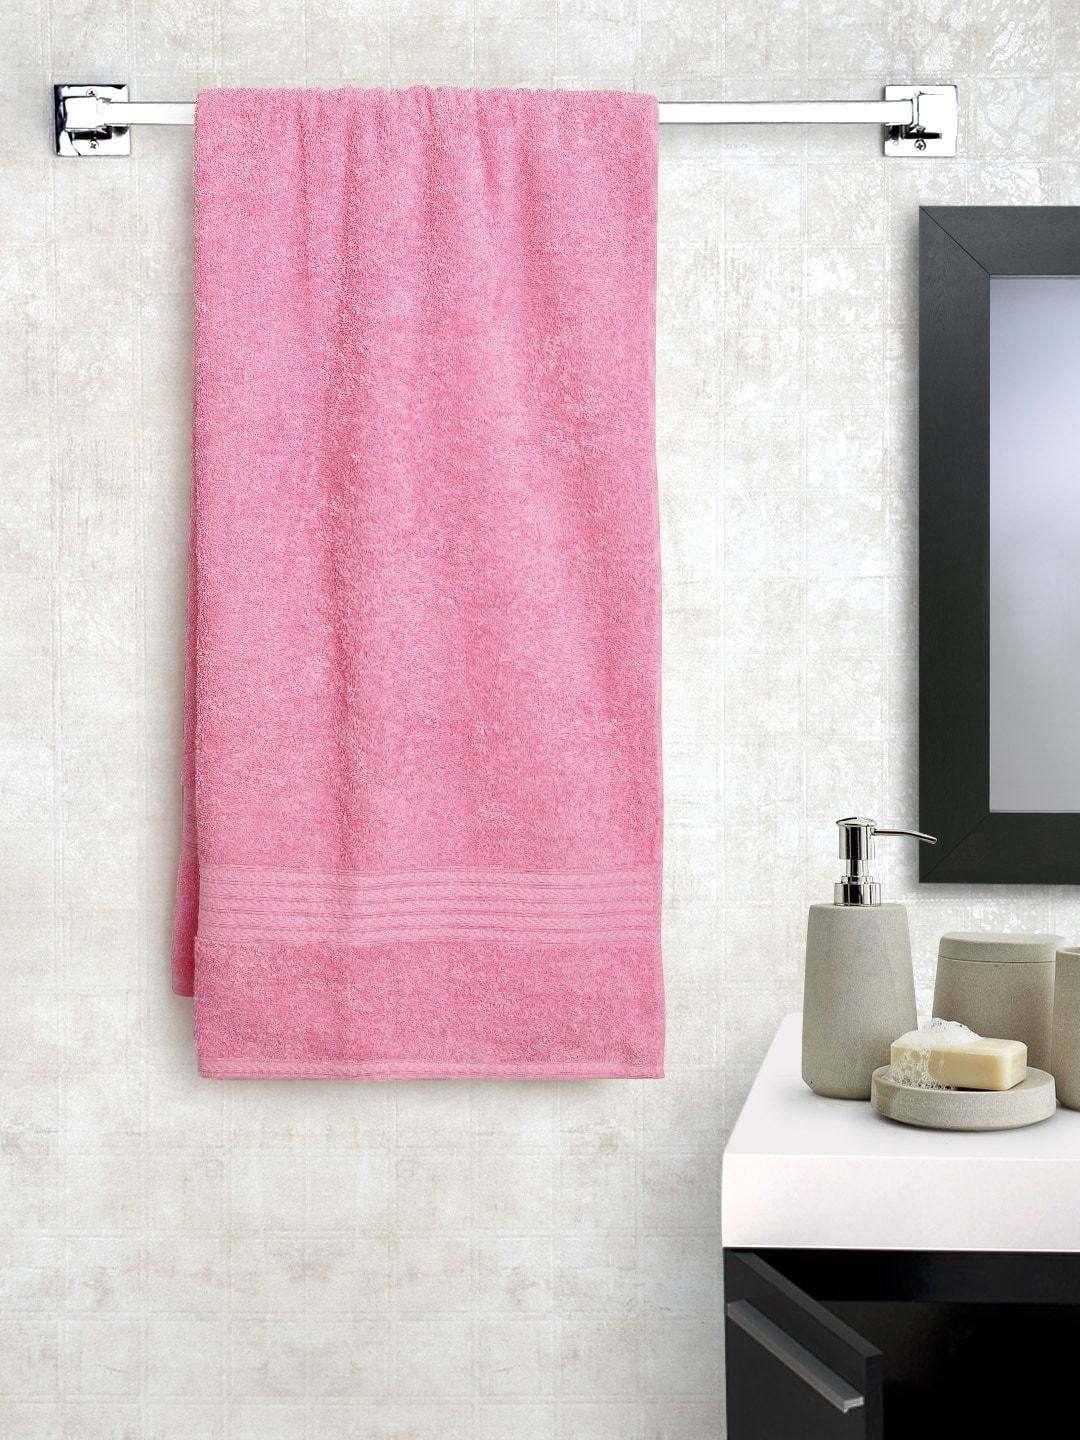 BOMBAY DYEING Pink Cotton 450 GSM Bath Towel Price in India